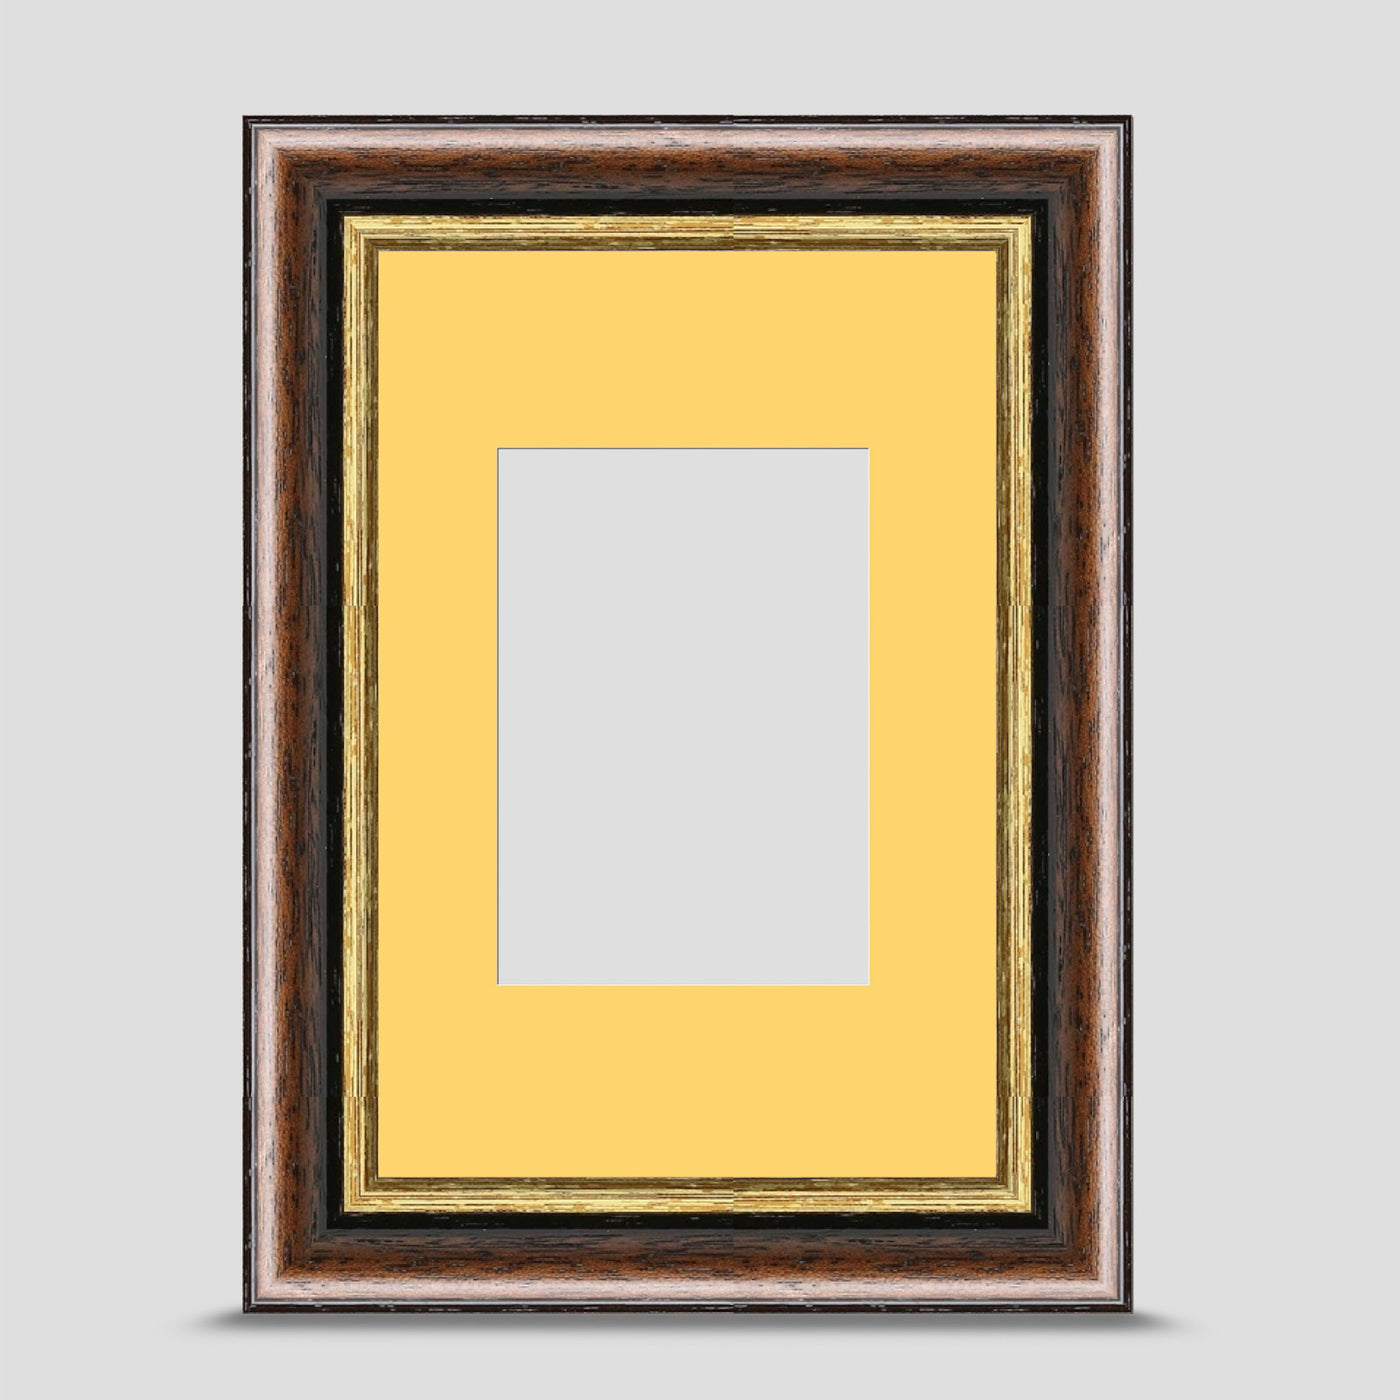 6x4 Brown & Gold Picture Frame with a 3.5x2.5 Mount